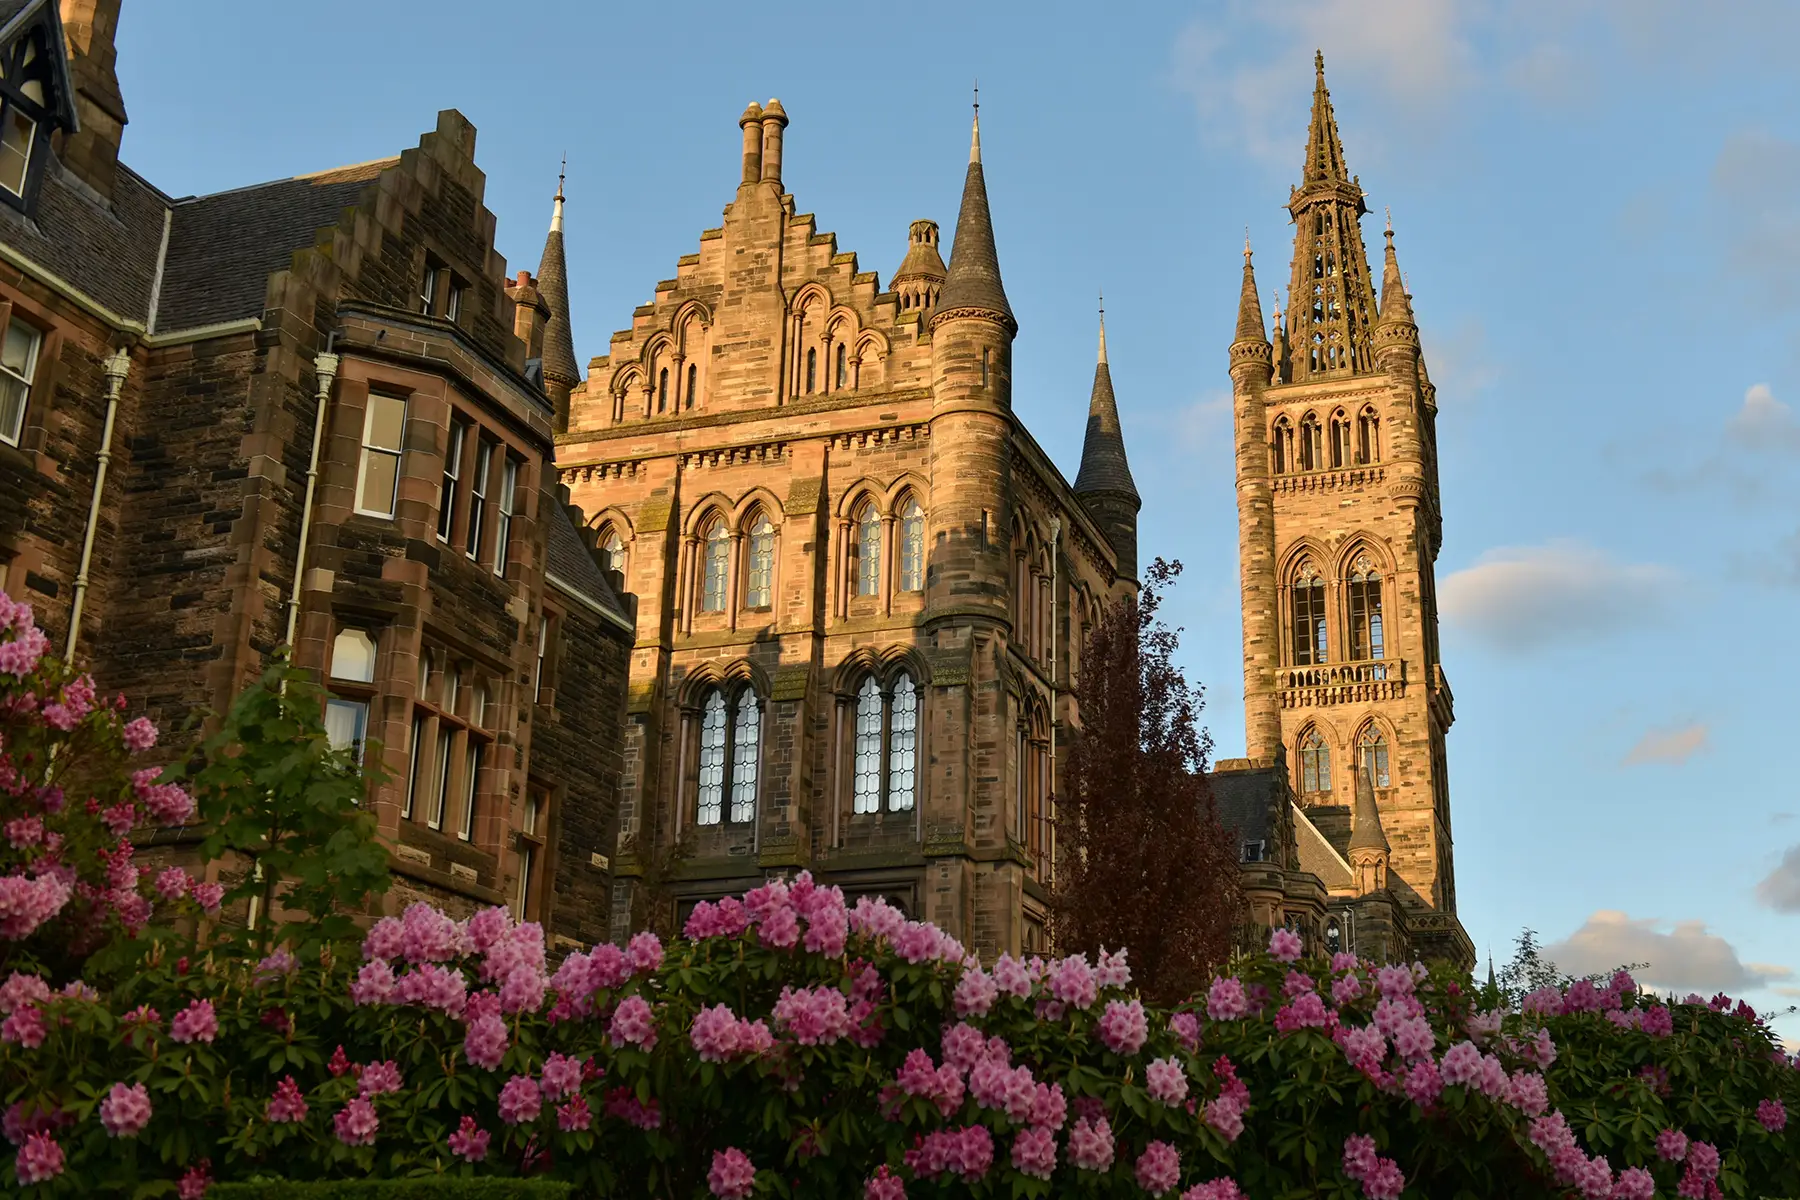 Gothic university building early evening, rhododendrons in foreground.